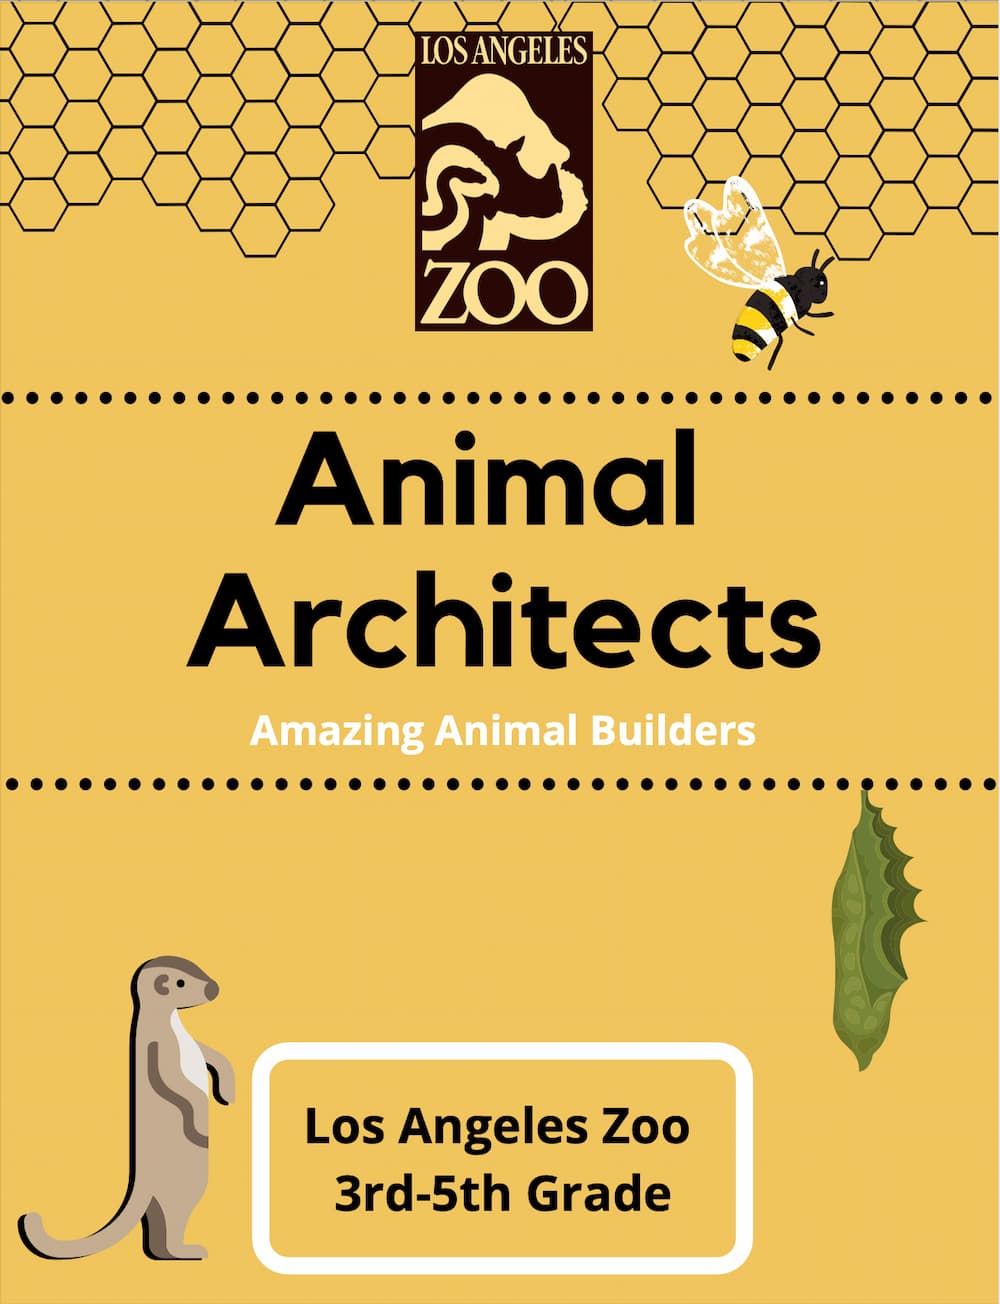 Animal Architects cover featuring a honeycomb pattern